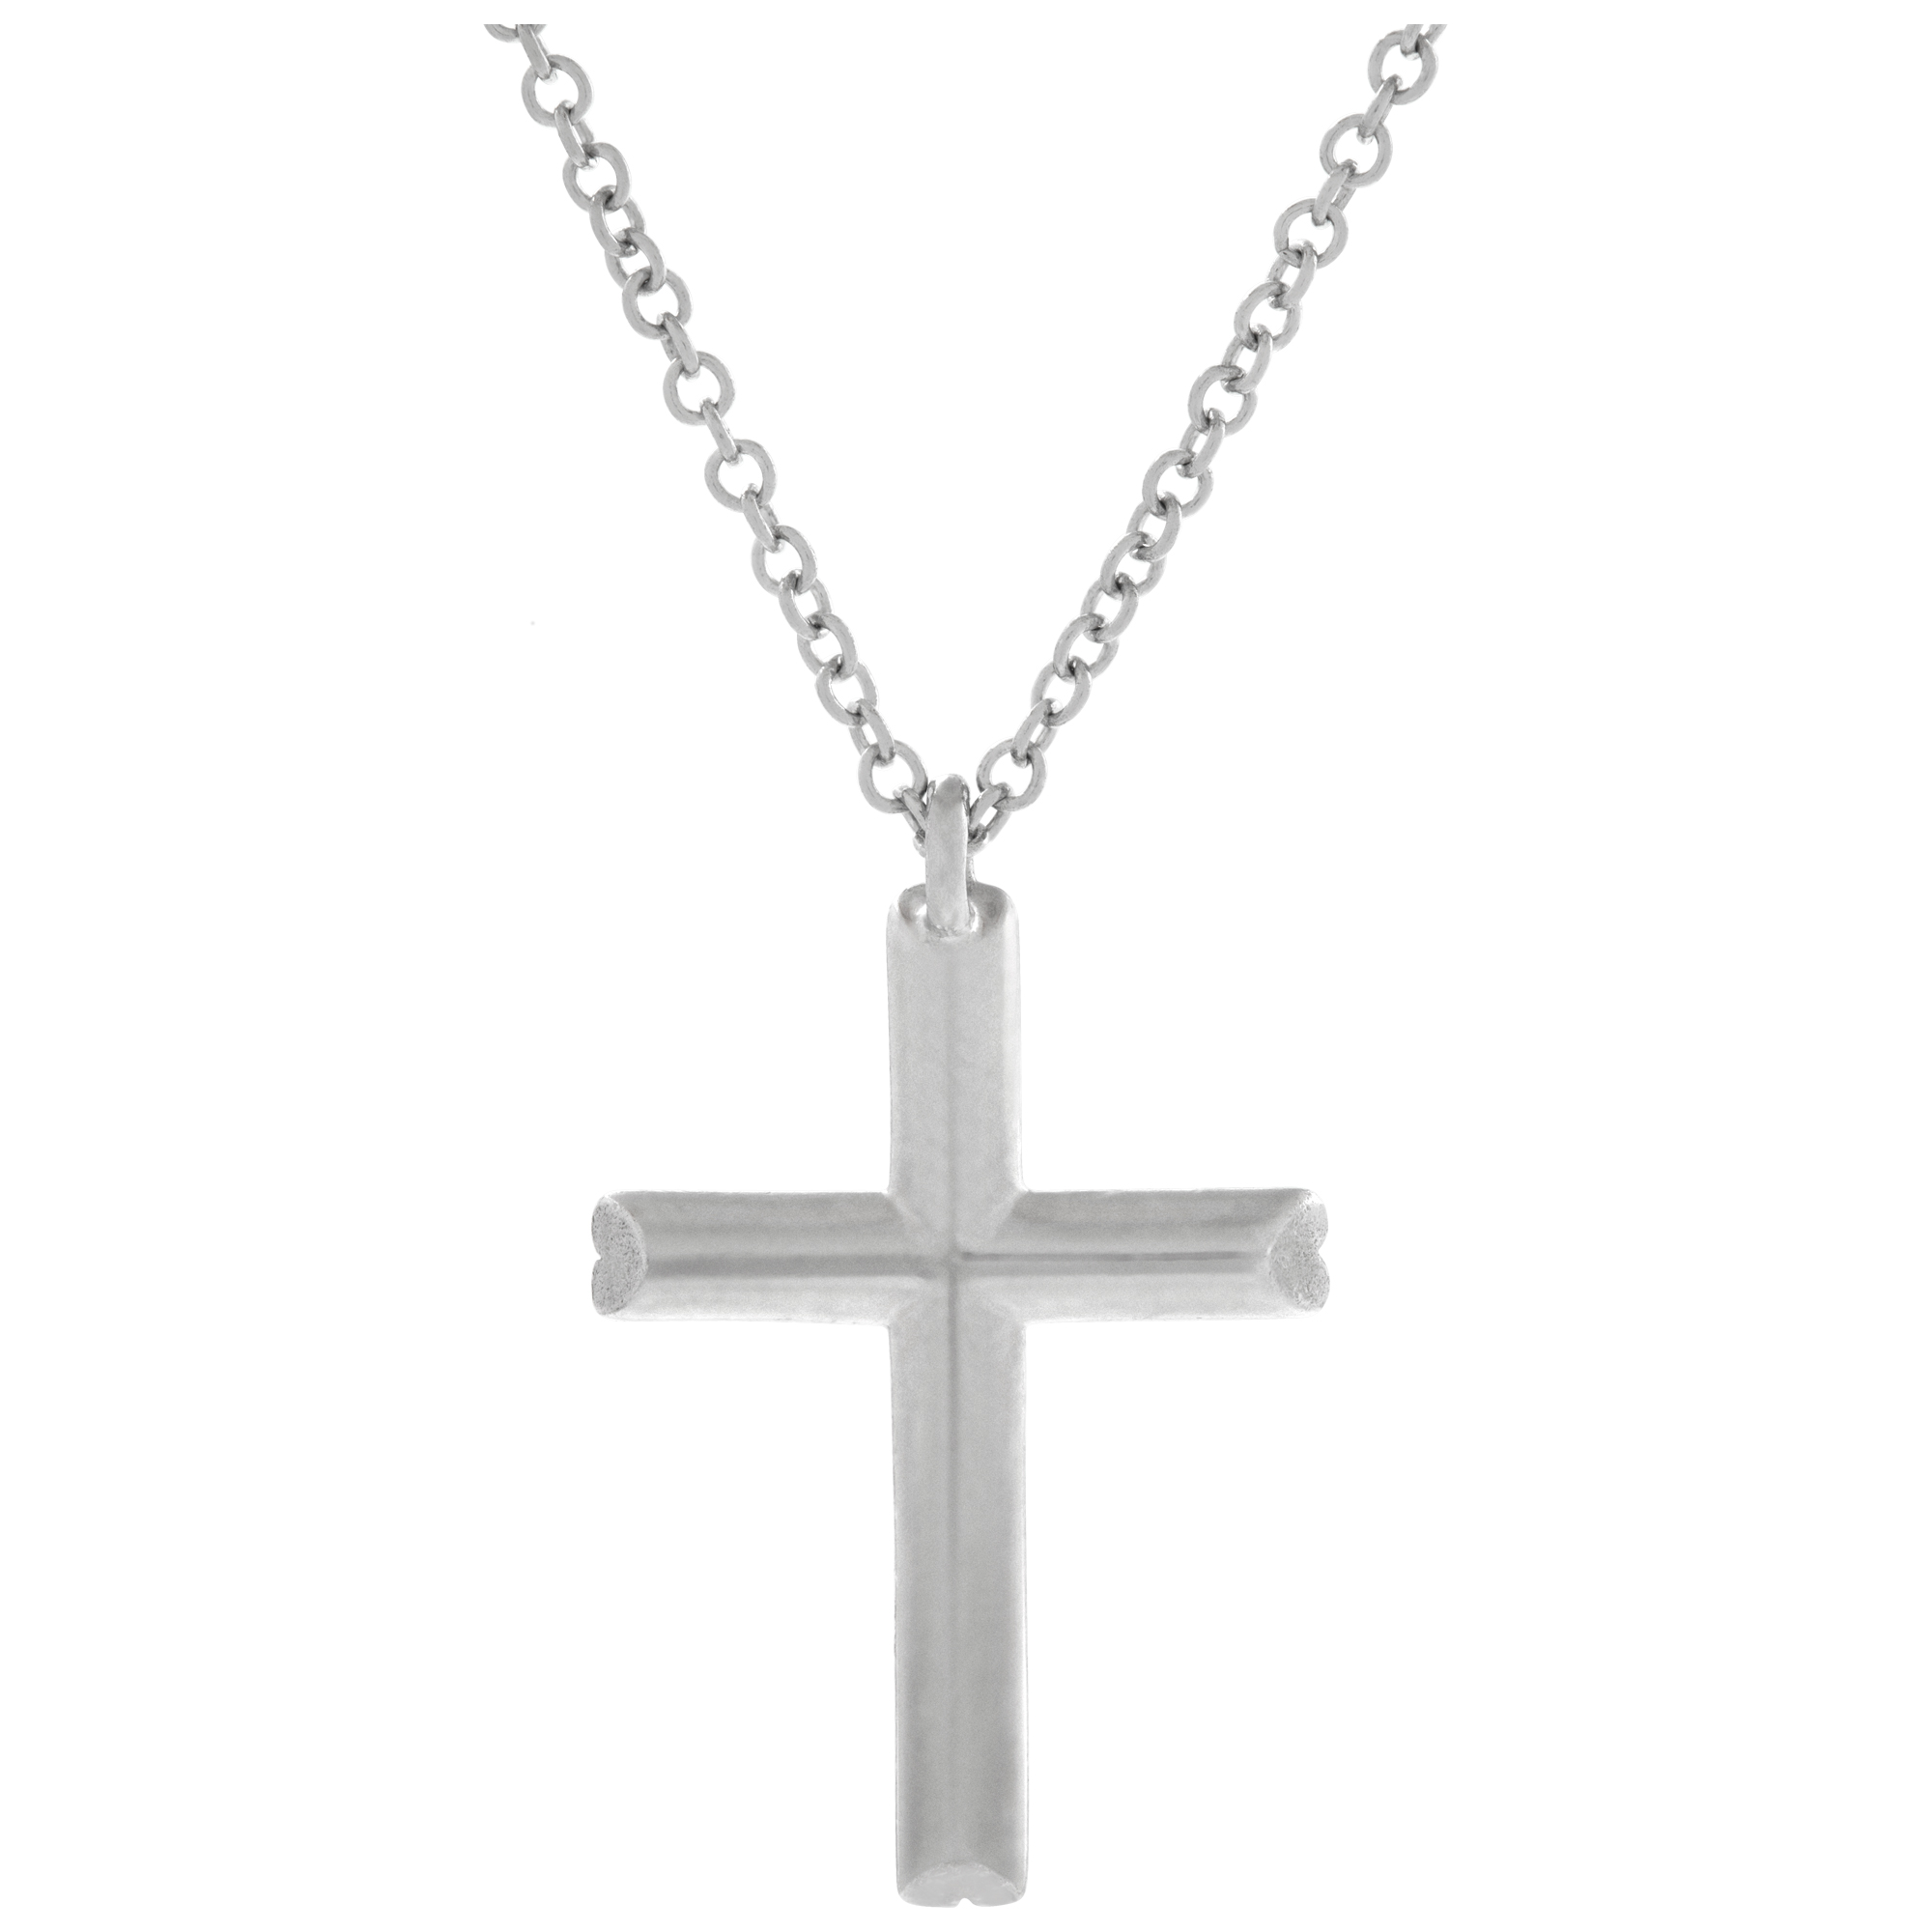 Tiffany & Co. Cross sterling silver necklace